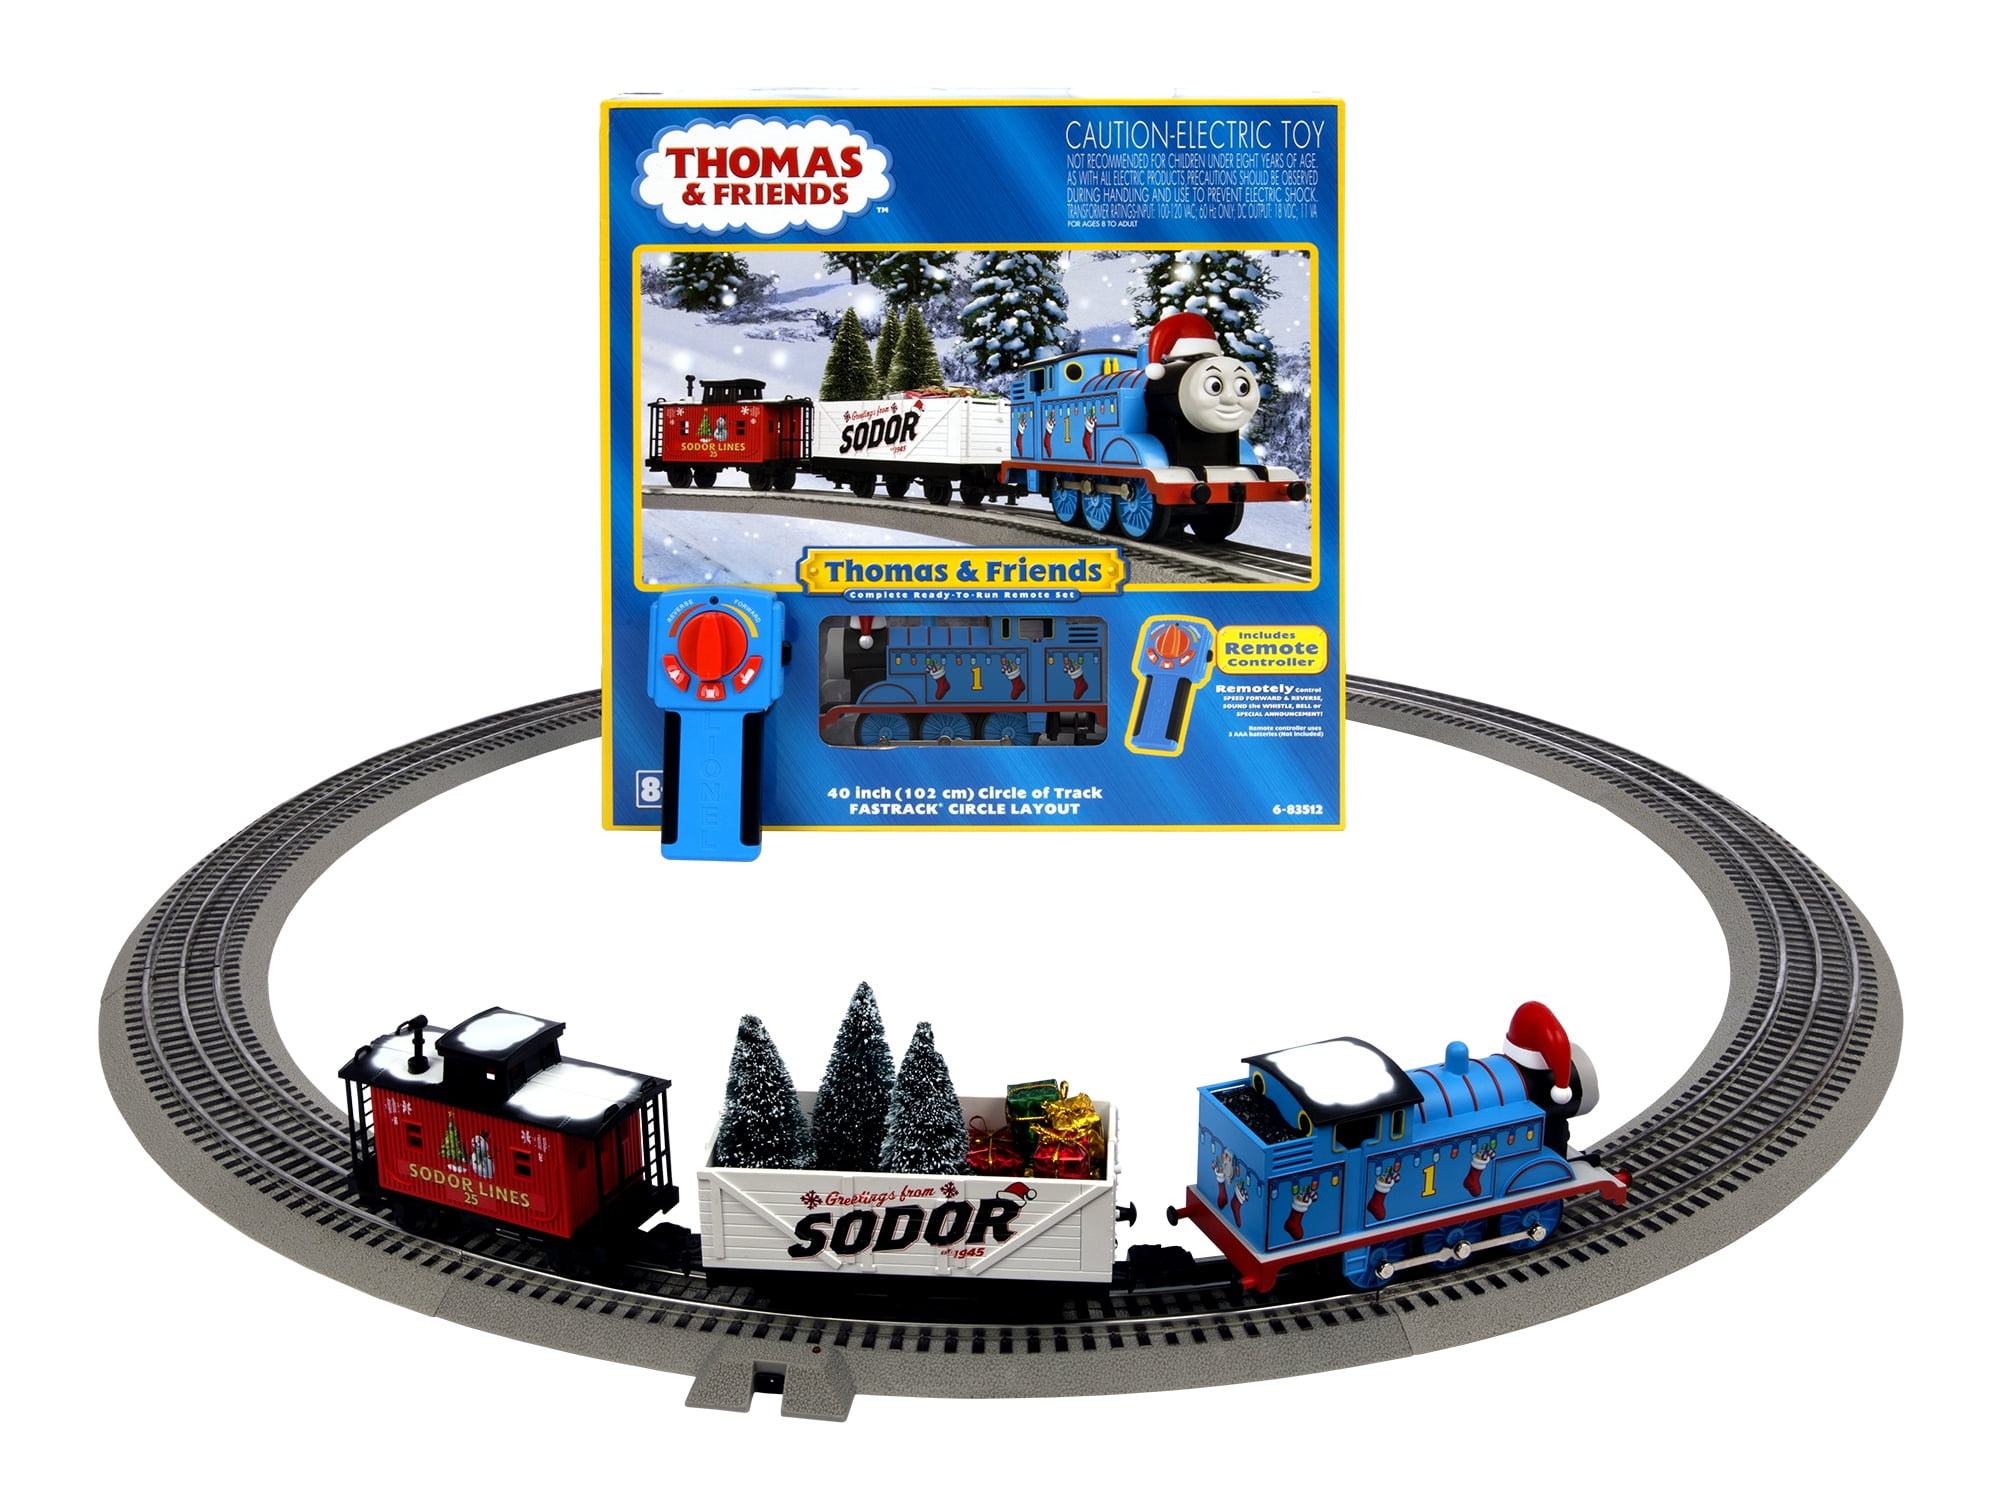 Lionel Thomas & Friends Christmas O Gauge Model Train Set with Remote and Bluetooth Capability - 1